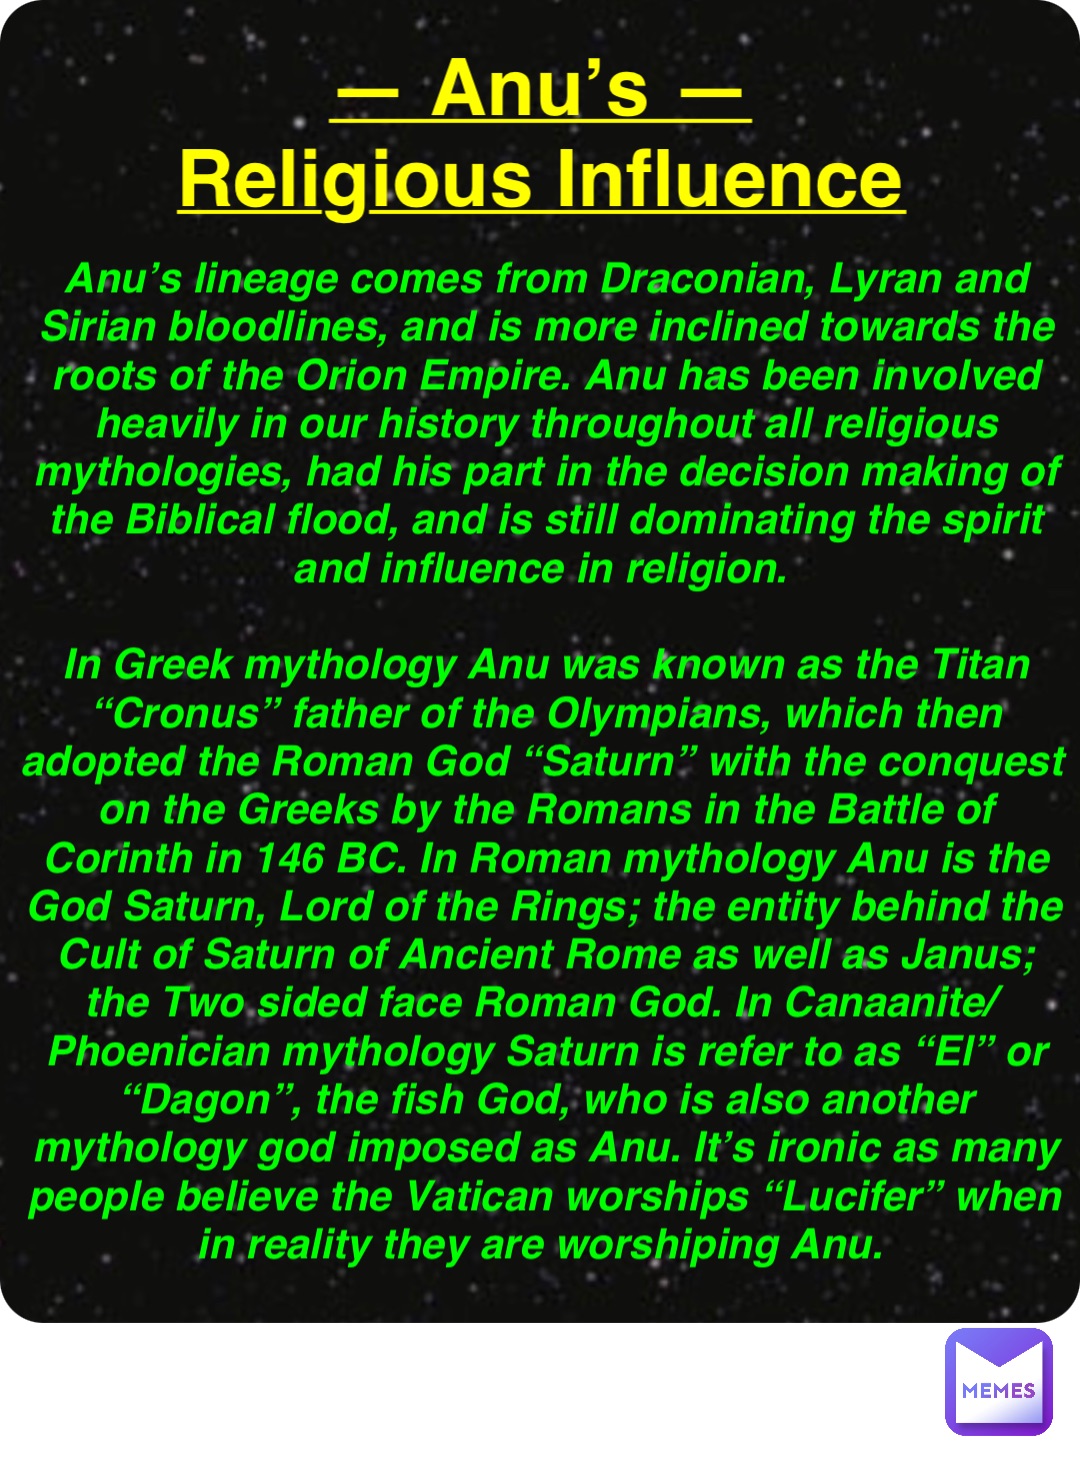 Double tap to edit — Anu’s —
Religious Influence Anu’s lineage comes from Draconian, Lyran and Sirian bloodlines, and is more inclined towards the roots of the Orion Empire. Anu has been involved heavily in our history throughout all religious mythologies, had his part in the decision making of the Biblical flood, and is still dominating the spirit and influence in religion.

In Greek mythology Anu was known as the Titan “Cronus” father of the Olympians, which then adopted the Roman God “Saturn” with the conquest on the Greeks by the Romans in the Battle of Corinth in 146 BC. In Roman mythology Anu is the God Saturn, Lord of the Rings; the entity behind the Cult of Saturn of Ancient Rome as well as Janus; the Two sided face Roman God. In Canaanite/Phoenician mythology Saturn is refer to as “El” or “Dagon”, the fish God, who is also another mythology god imposed as Anu. It’s ironic as many people believe the Vatican worships “Lucifer” when in reality they are worshiping Anu.